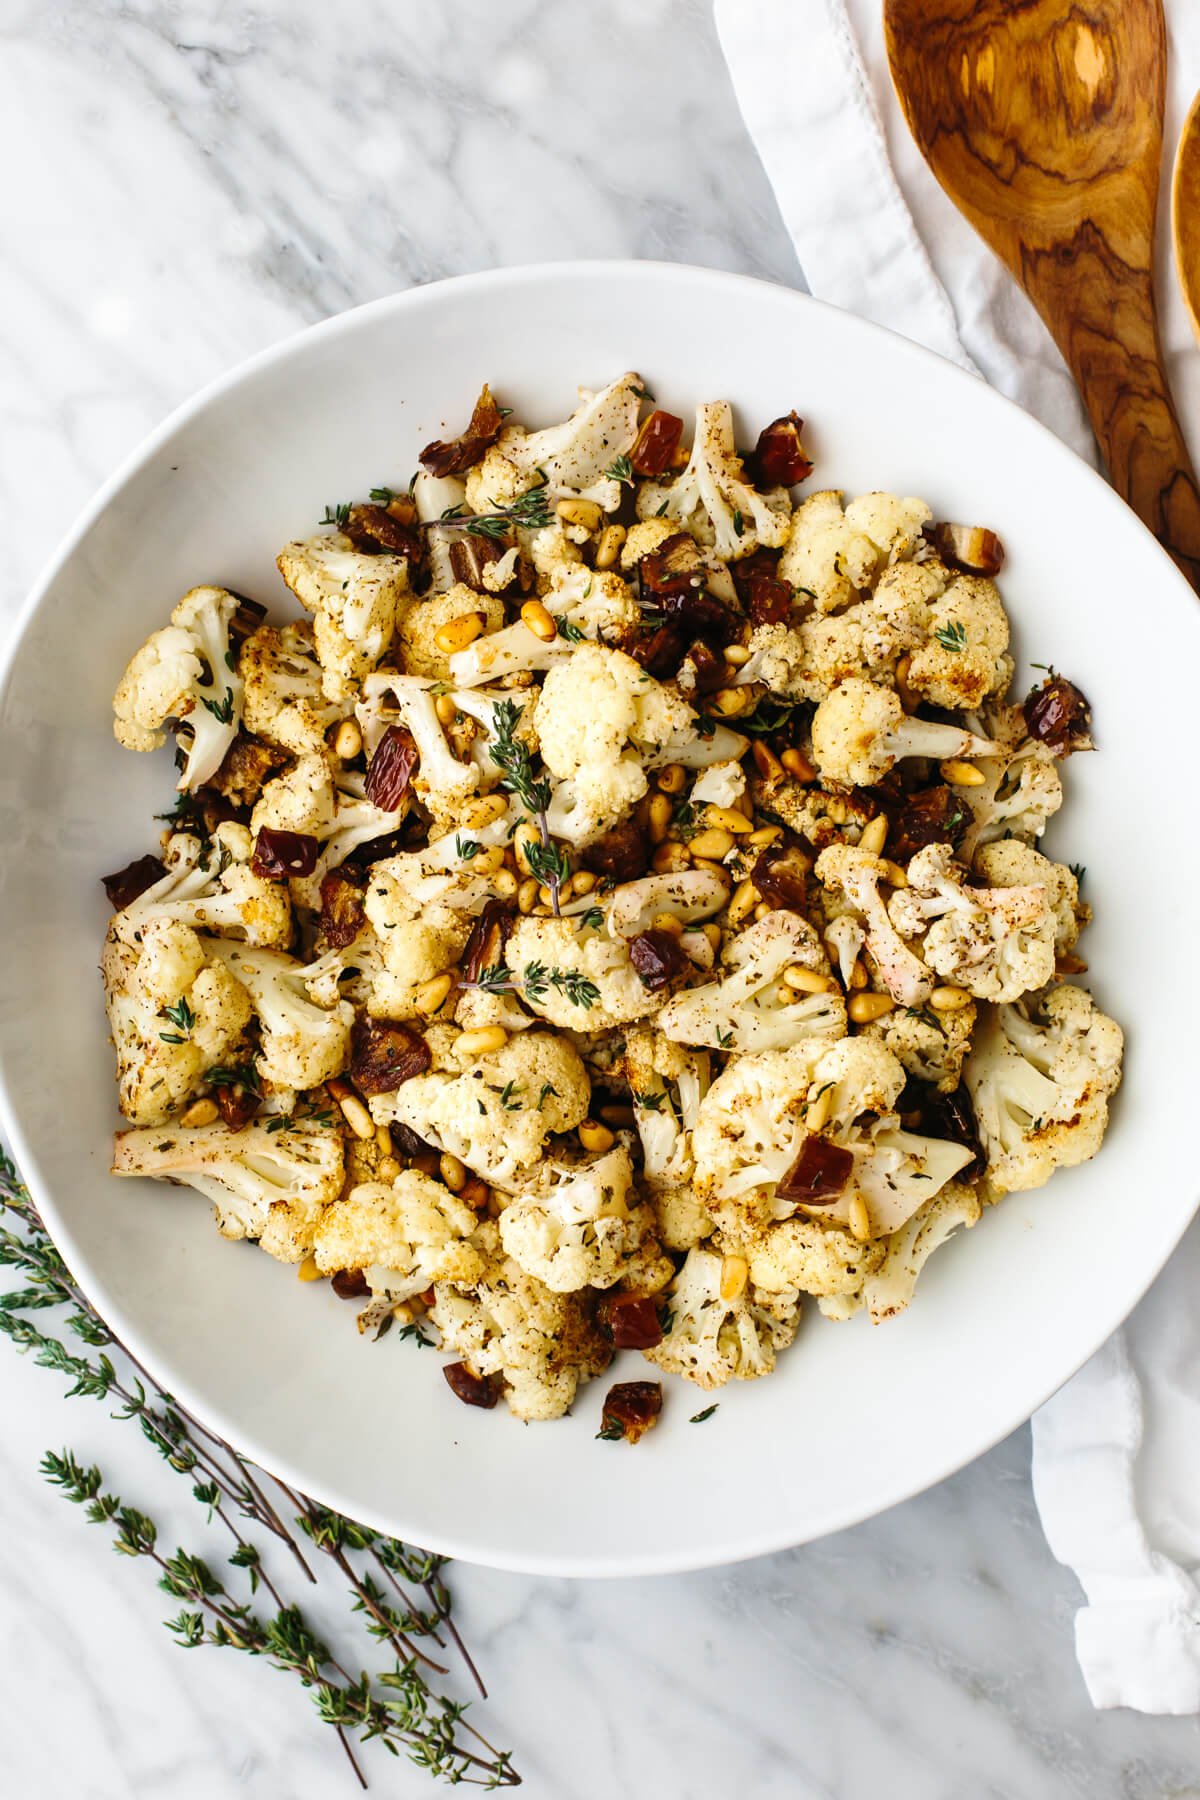 Roasted cauliflower with za'atar spice in a bowl.